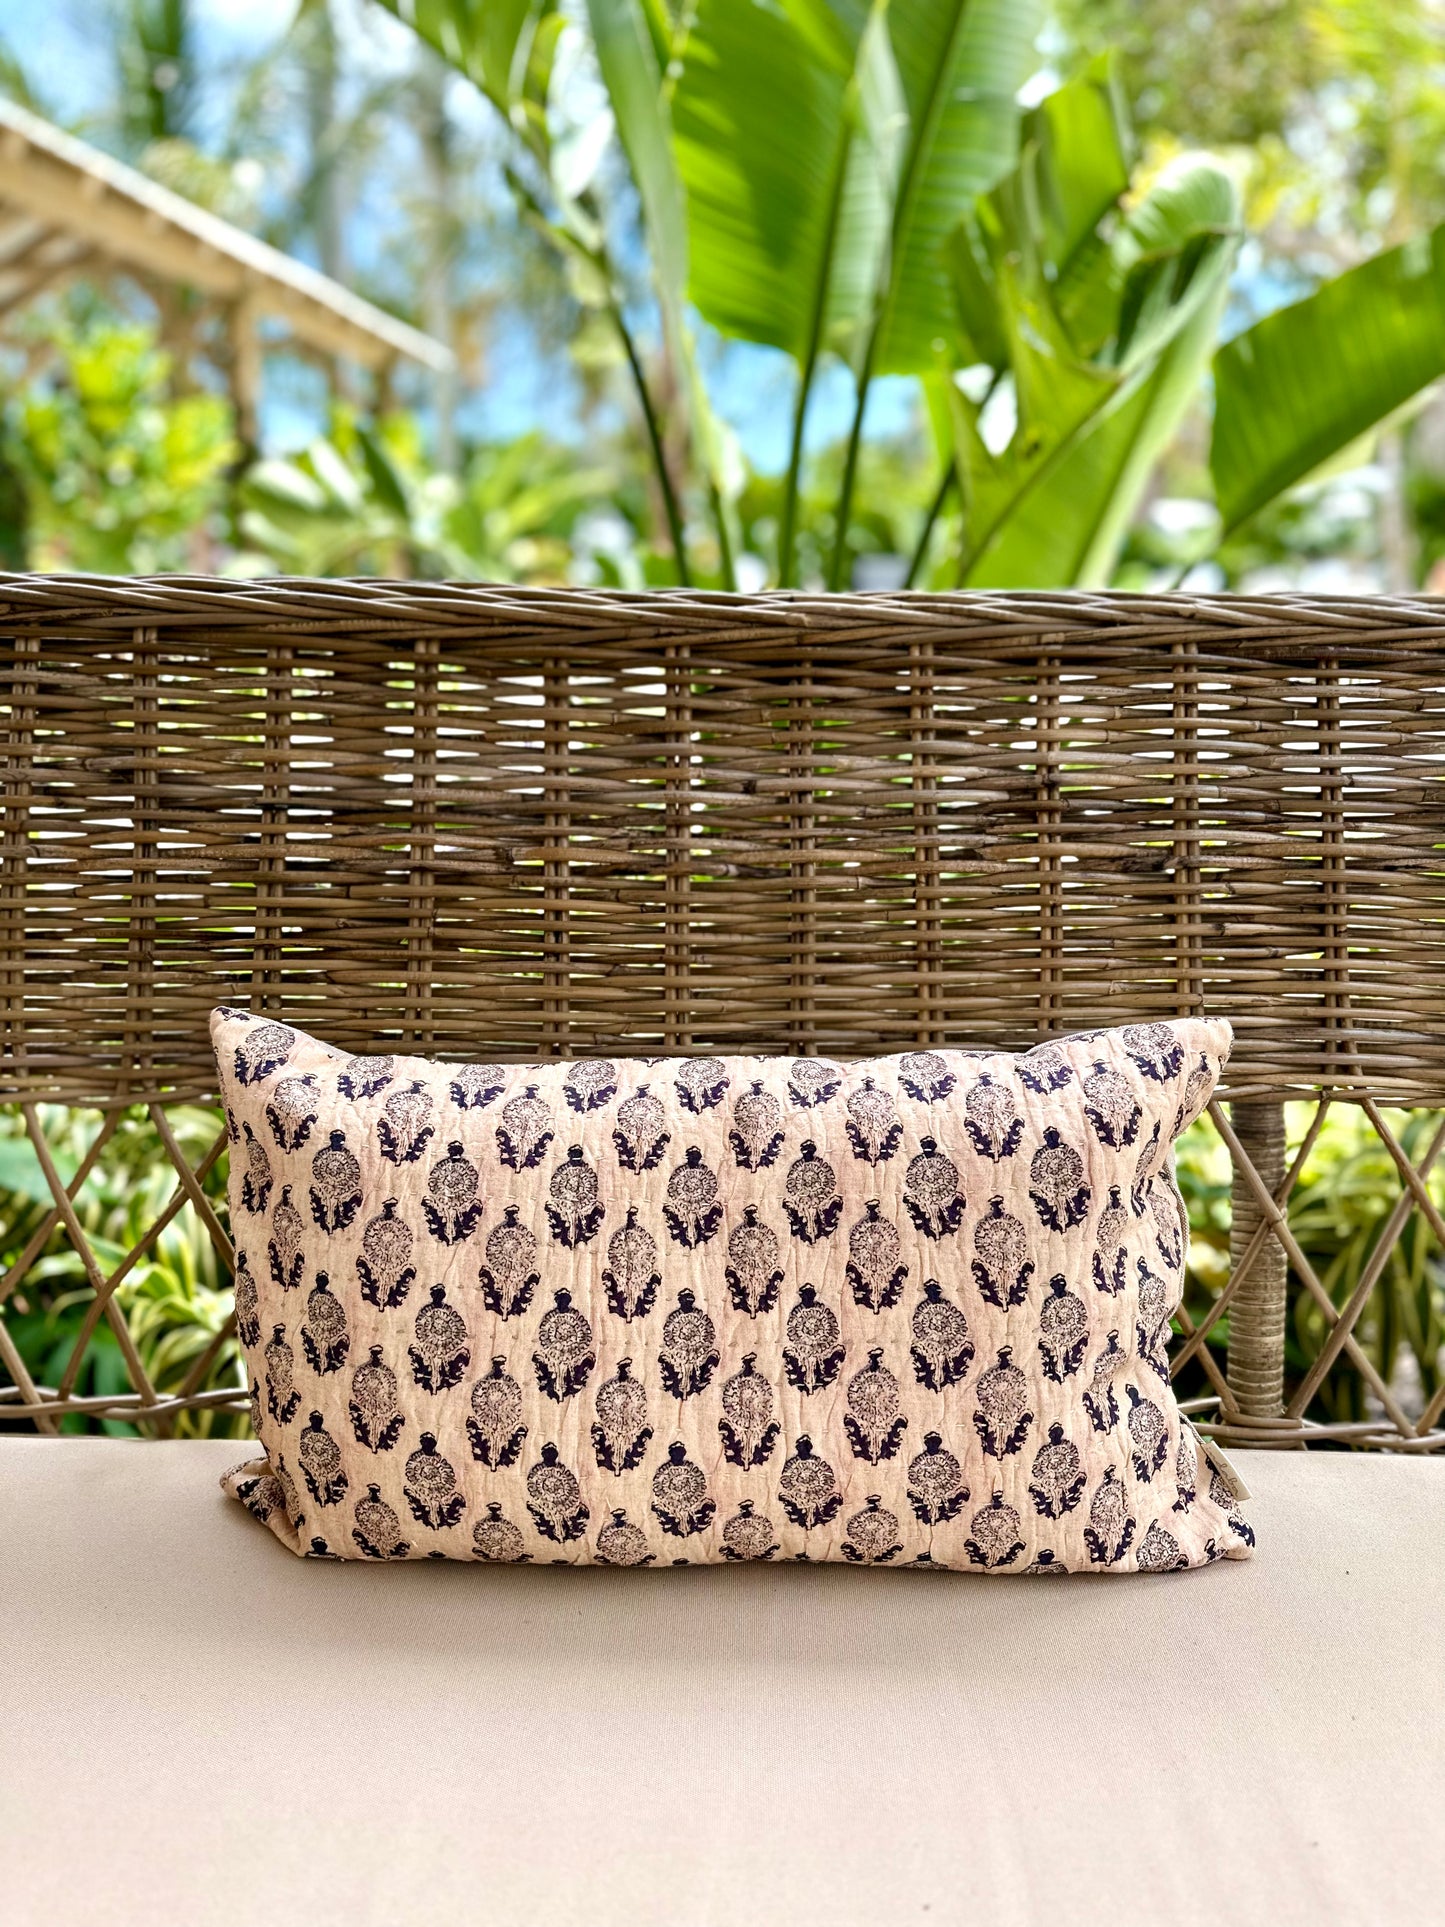 Linen Patterned Pillow, Five Styles